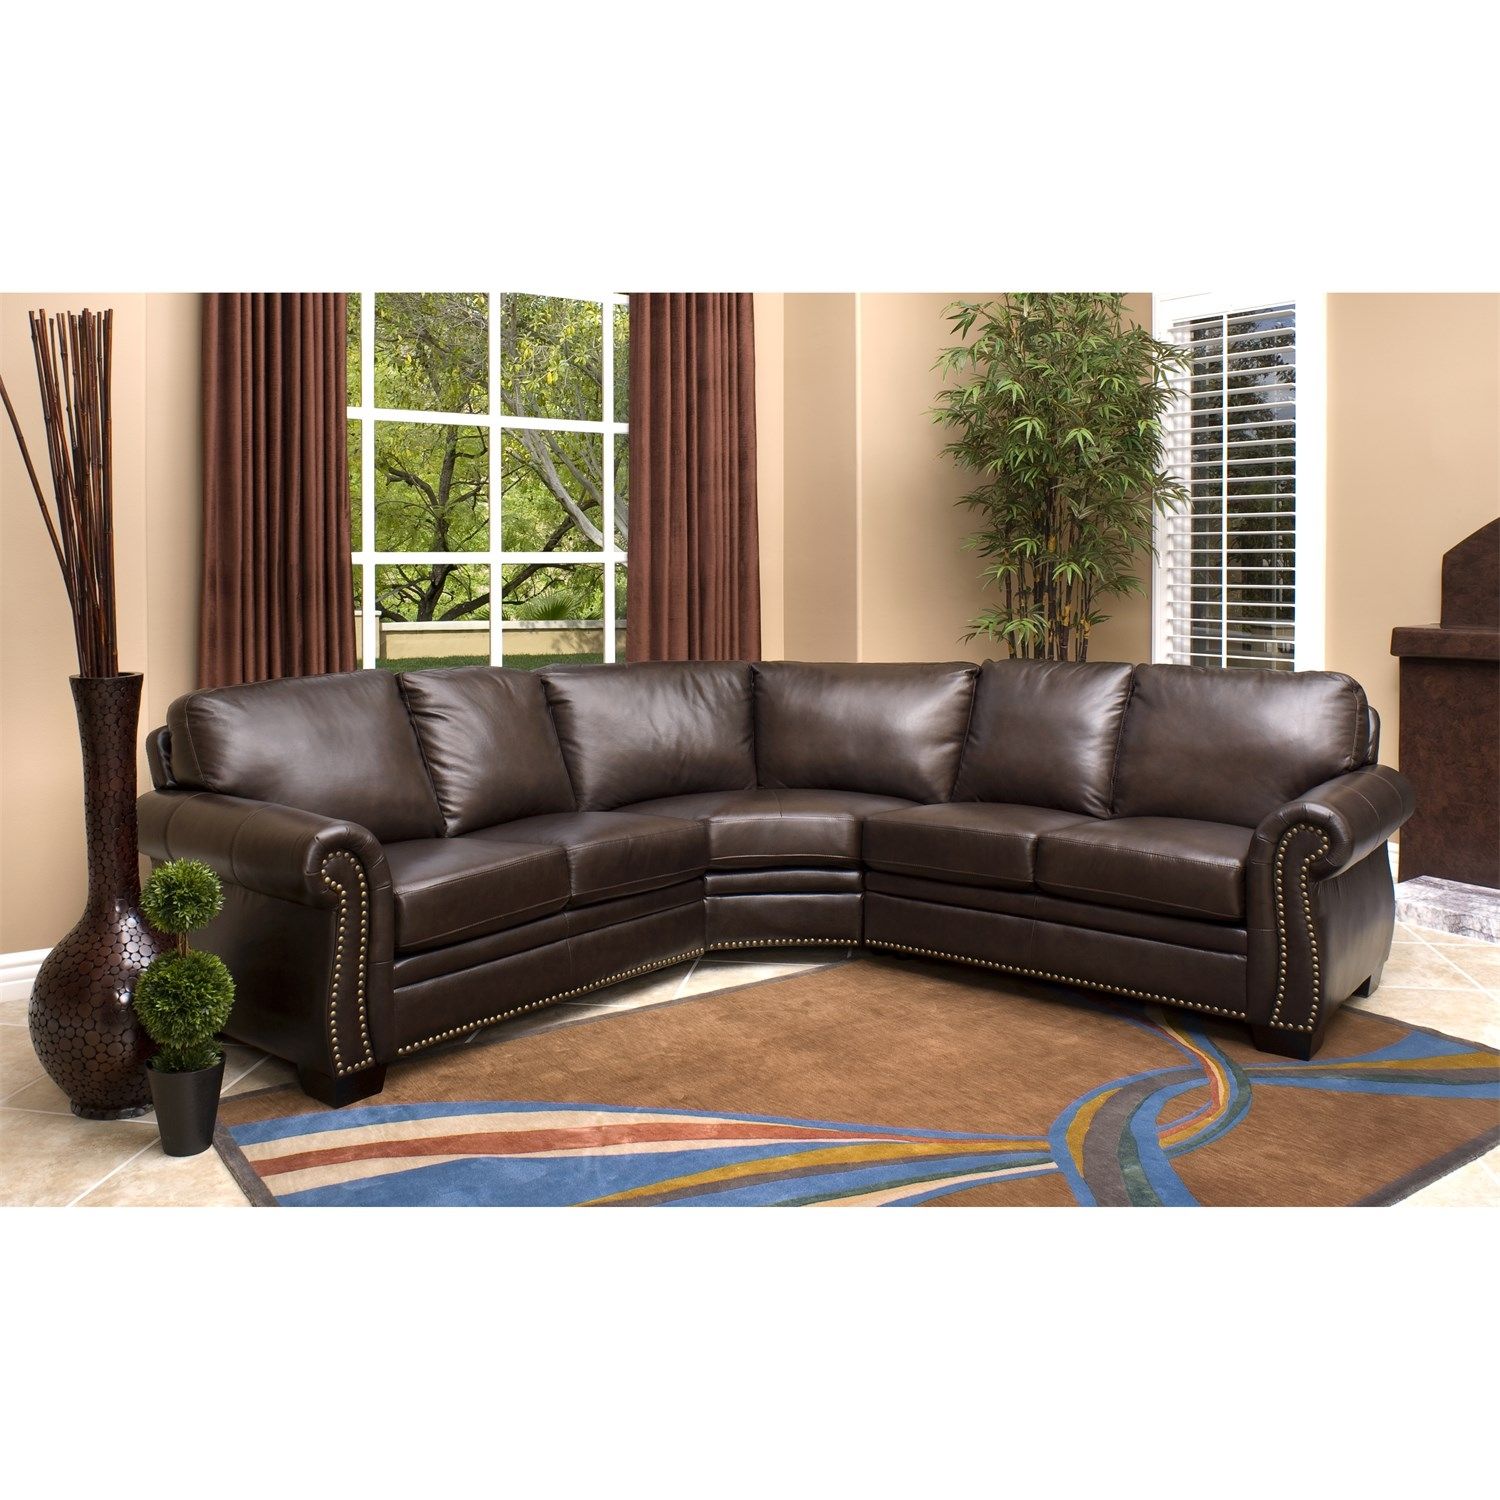 Abson Living Ci N410 Brn Oxford Italian Leather Sectional Sofa Pertaining To Abbyson Sectional Sofa (Photo 5 of 12)